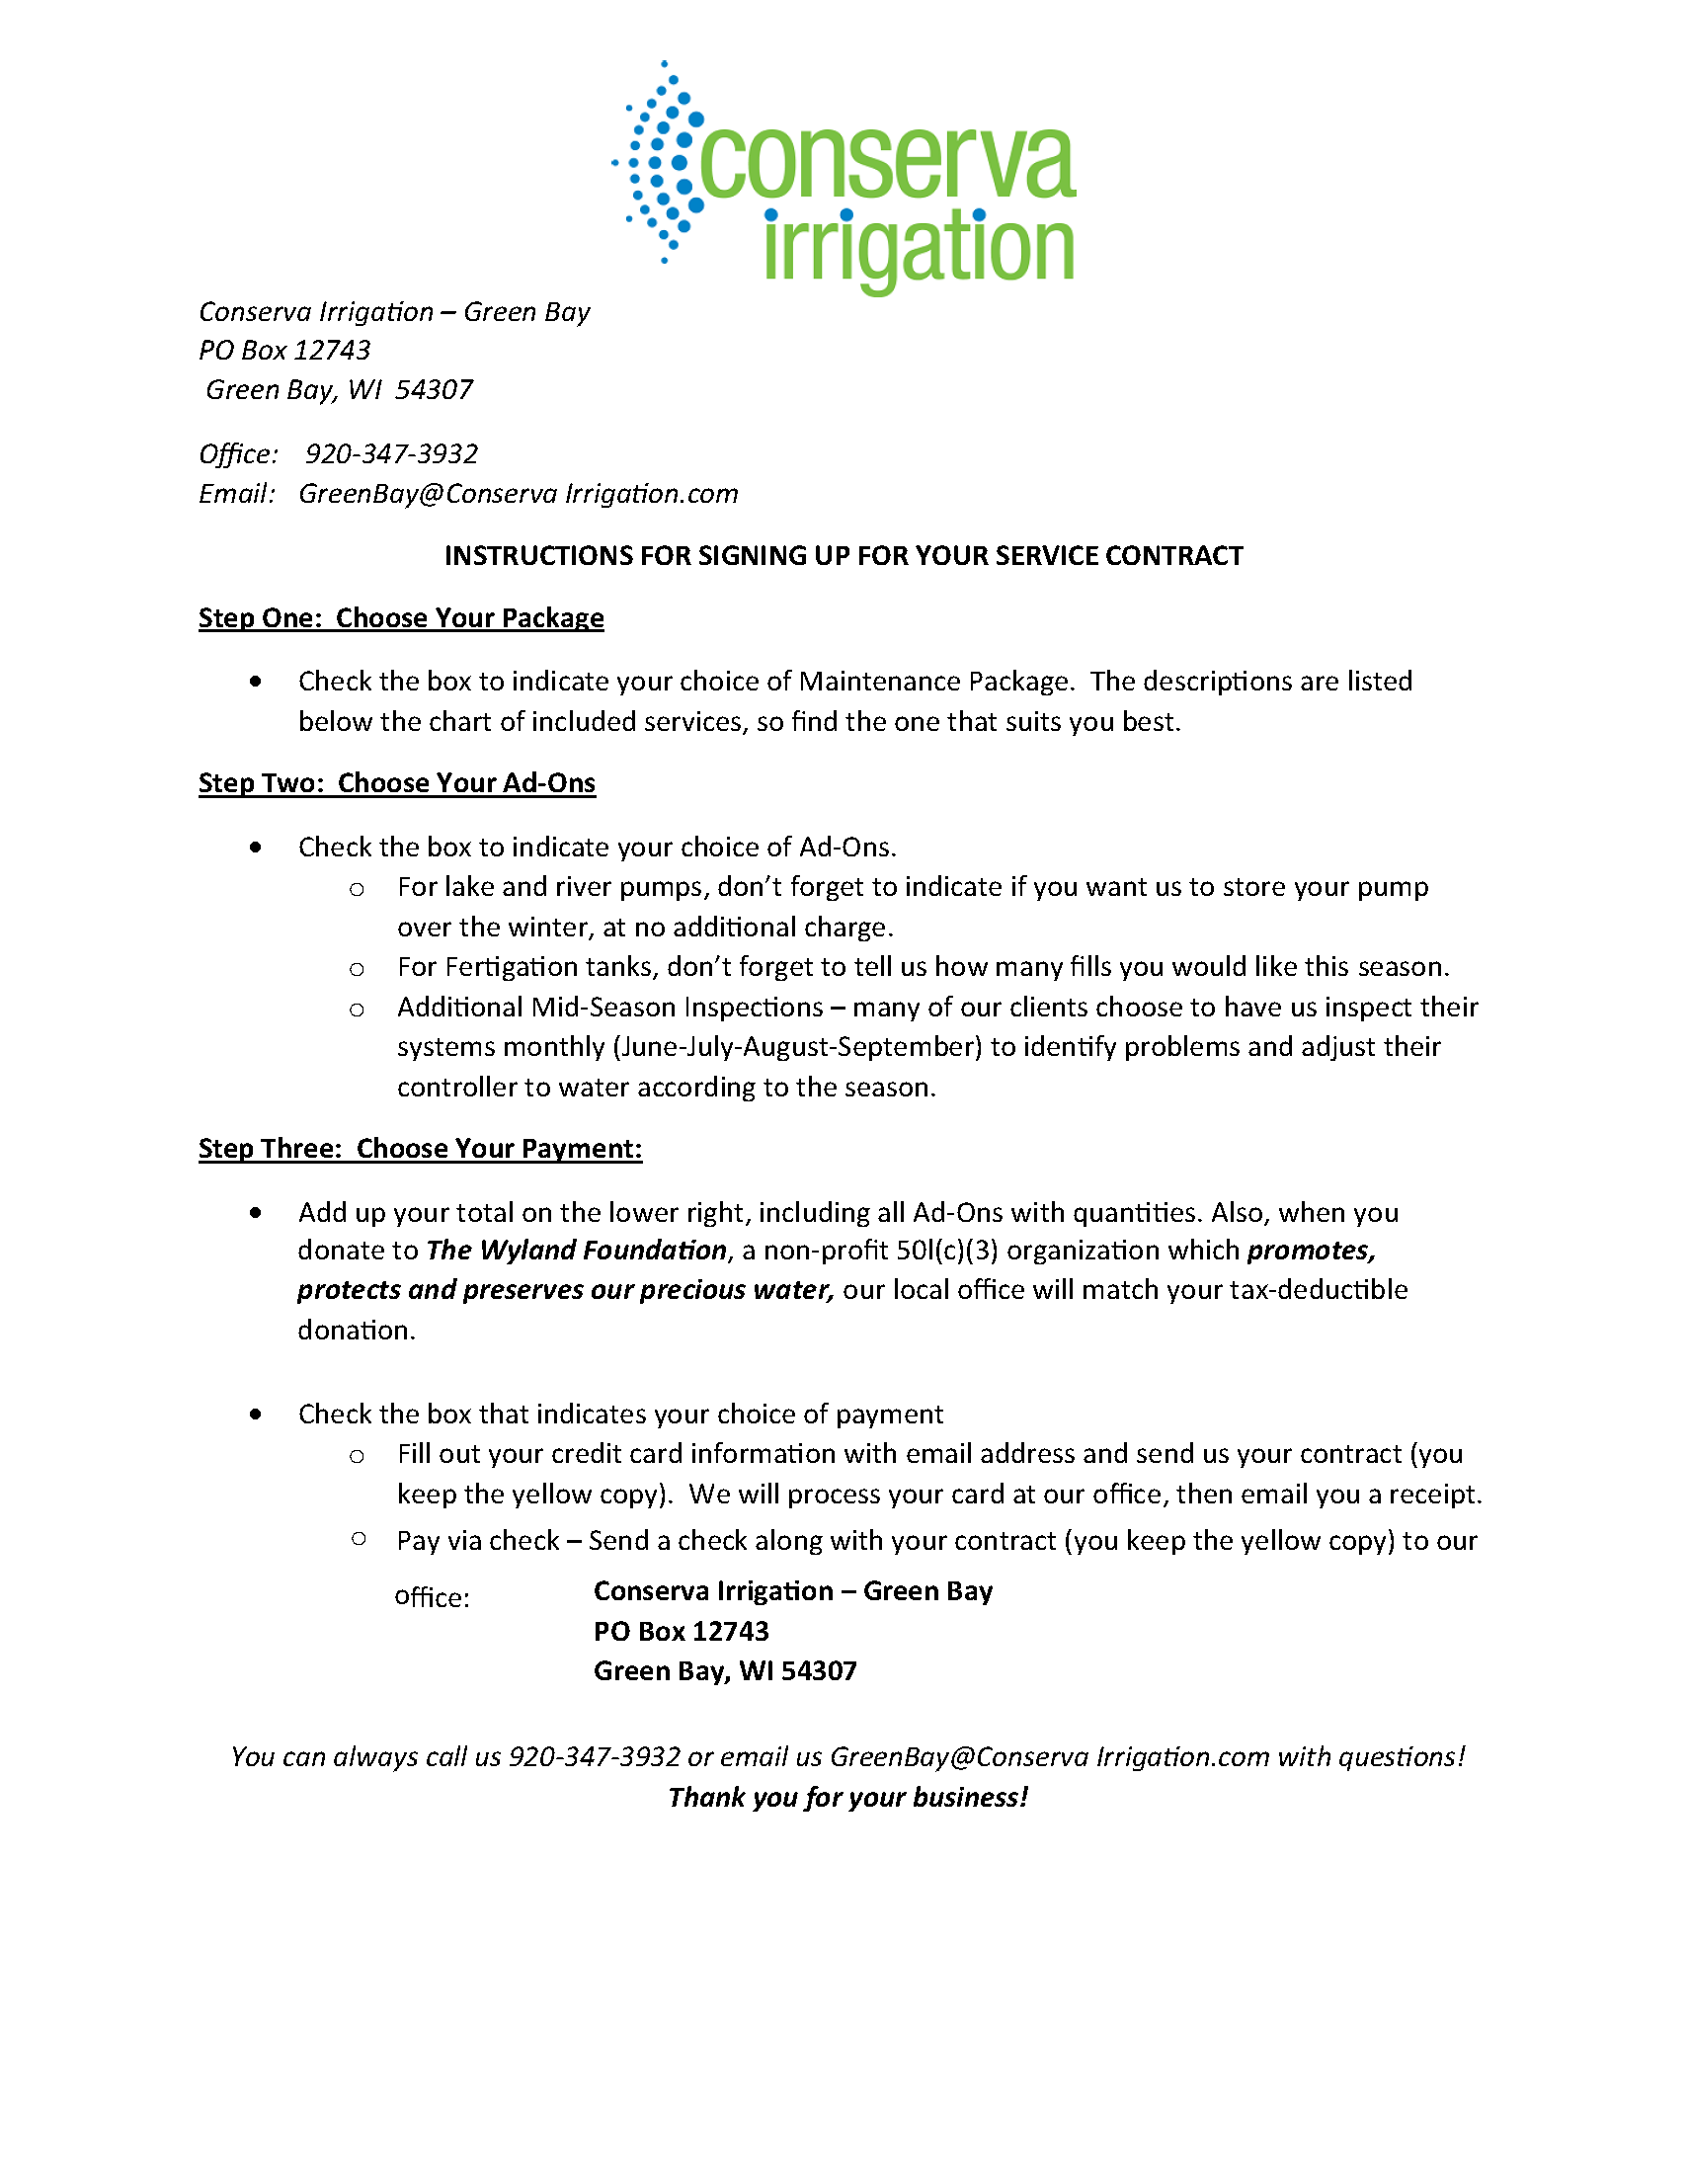 Conserva Irrigation Instructions for Signing Up for your Service Contract